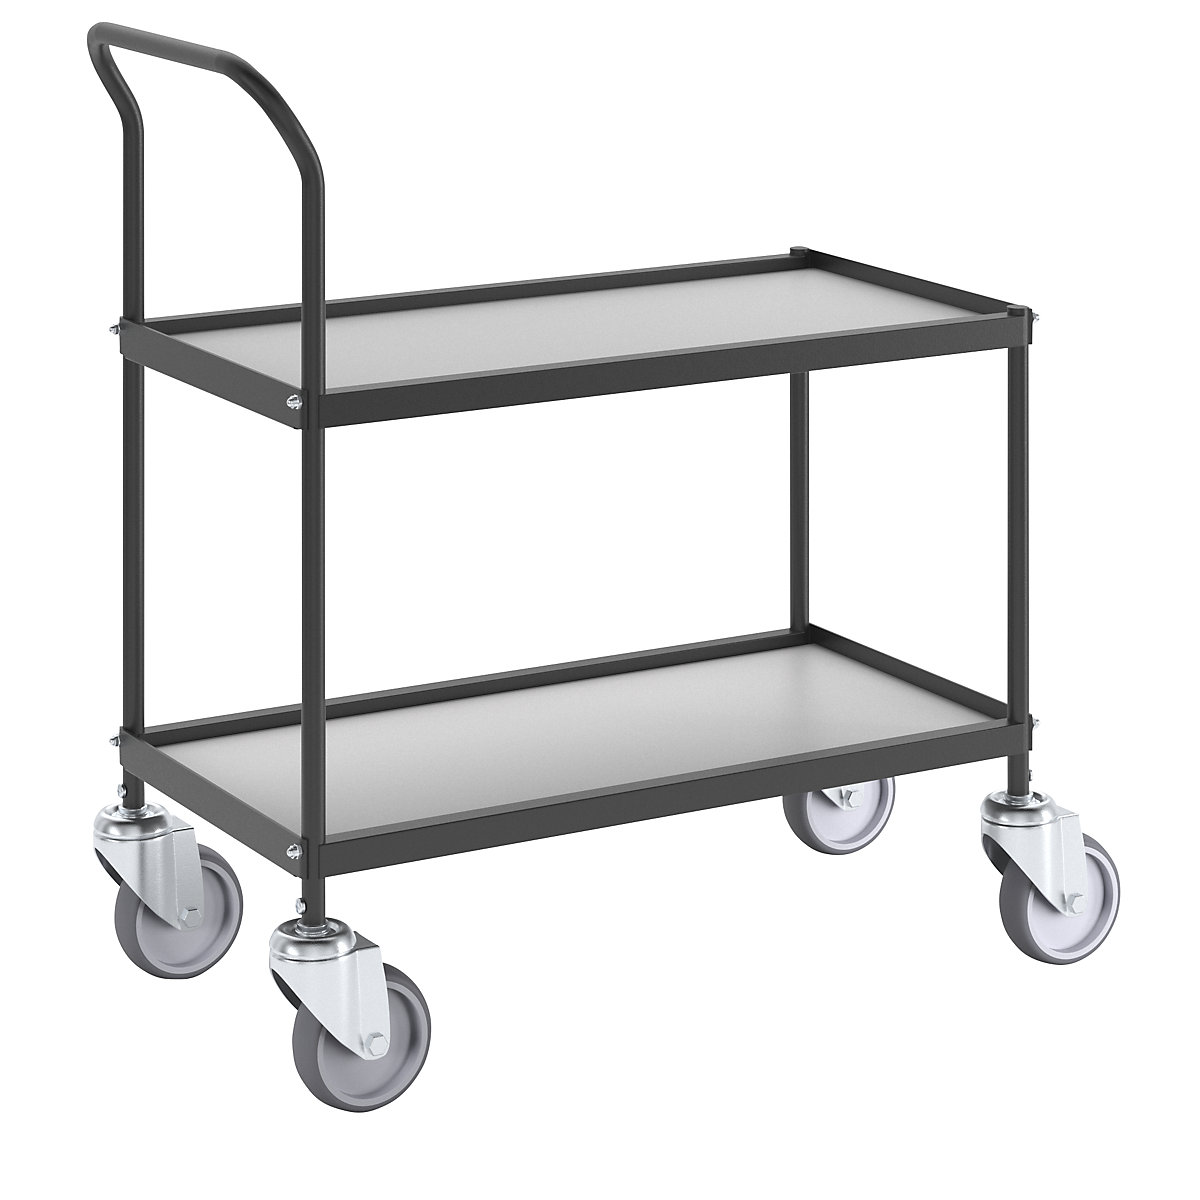 Serving and clearing trolley